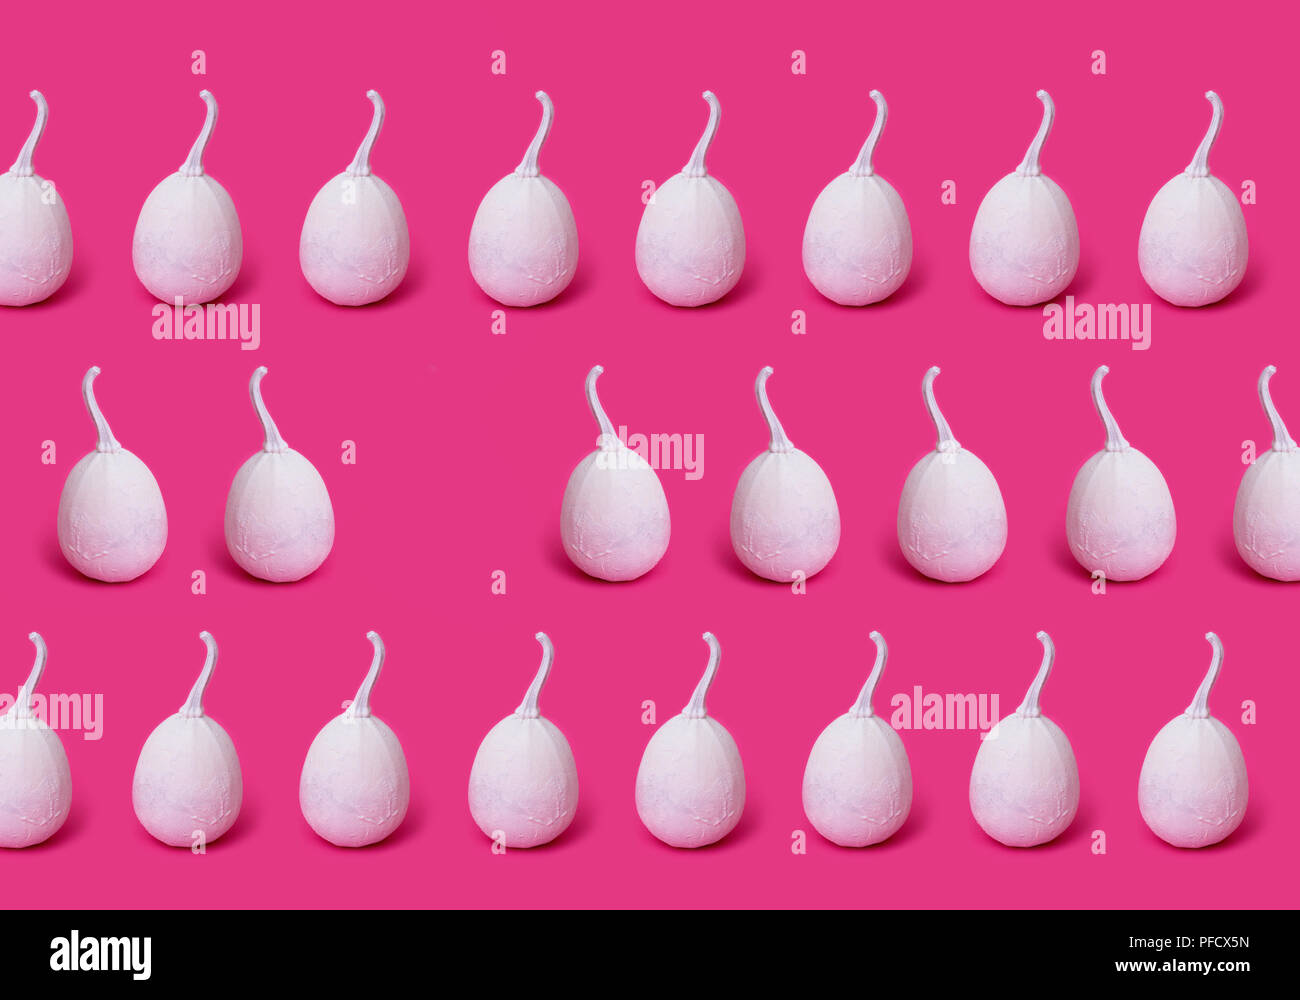 Collage with white painted pumpkins on a pink background Stock Photo